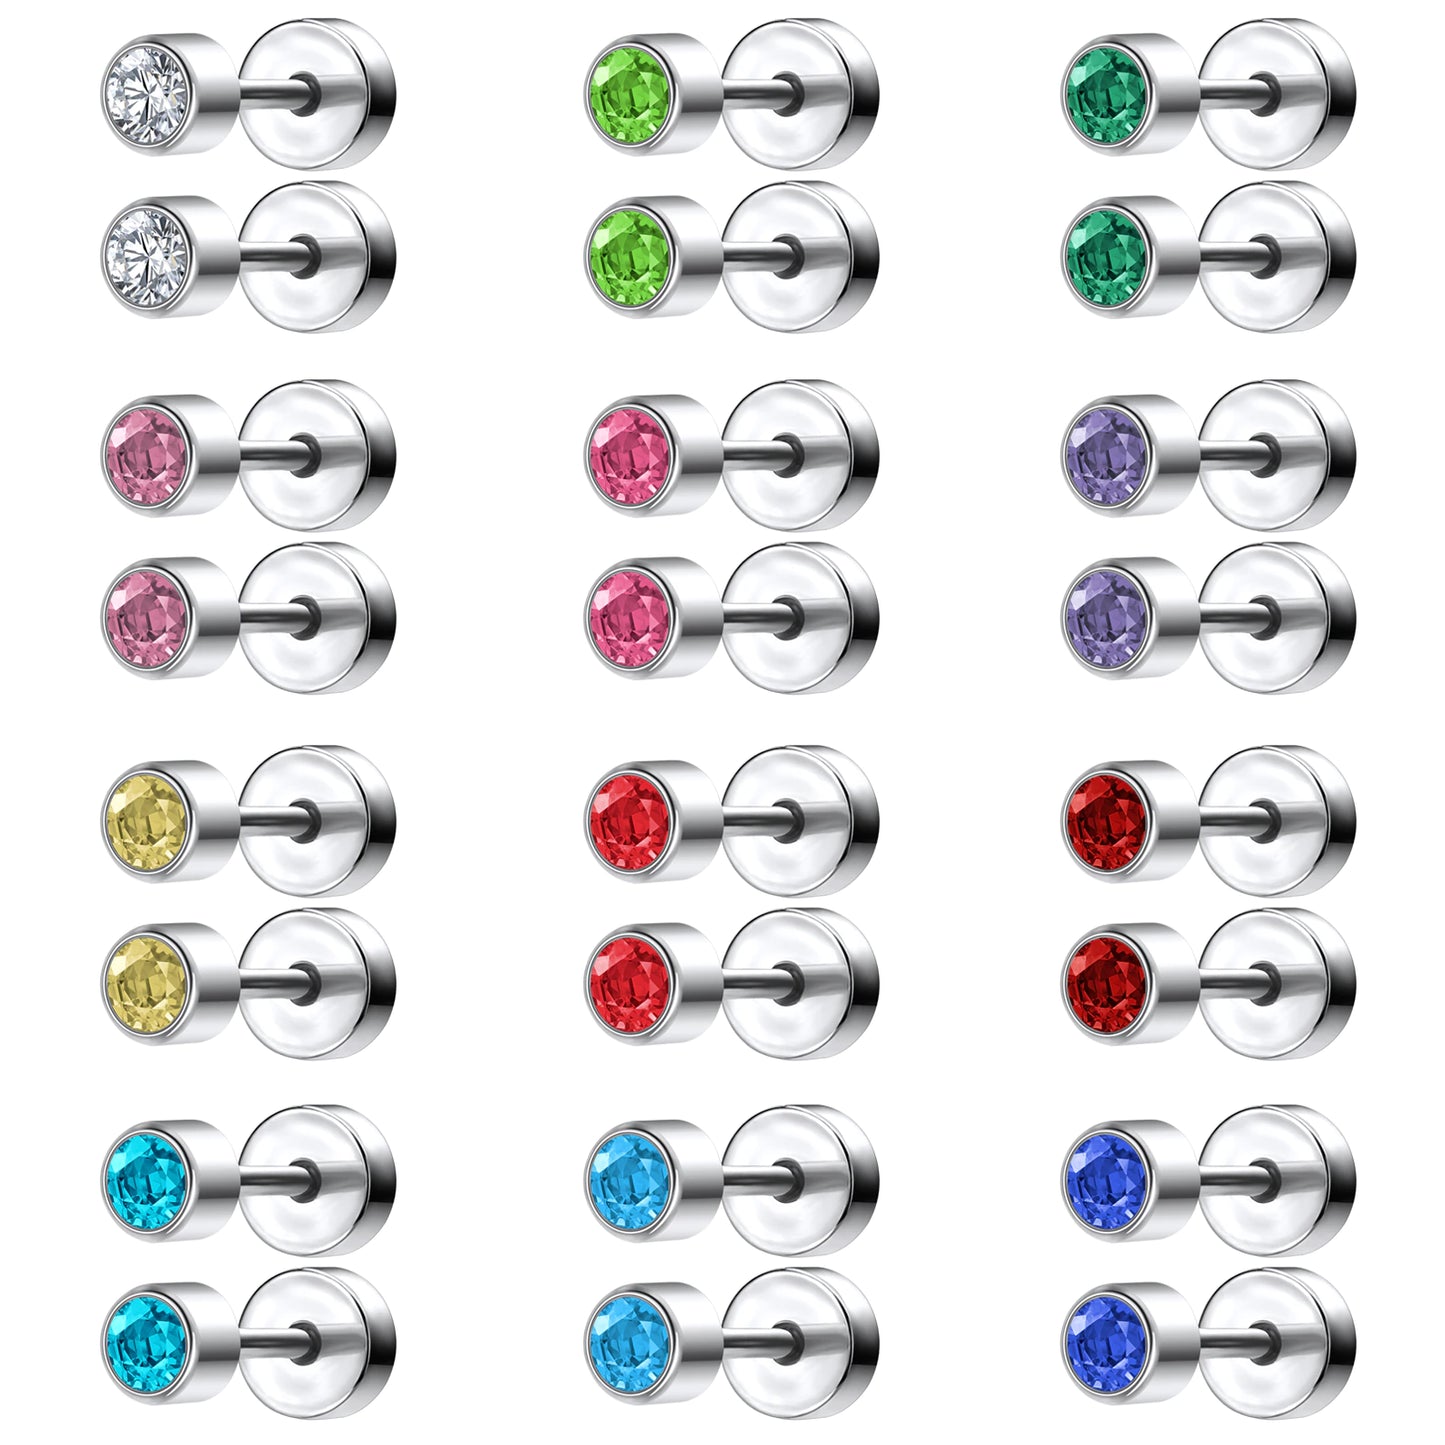 Baby and Children's Earrings:  Surgical Steel, Colourful CZ Screw Back Earrings x 4 - Set 1 Special Buy